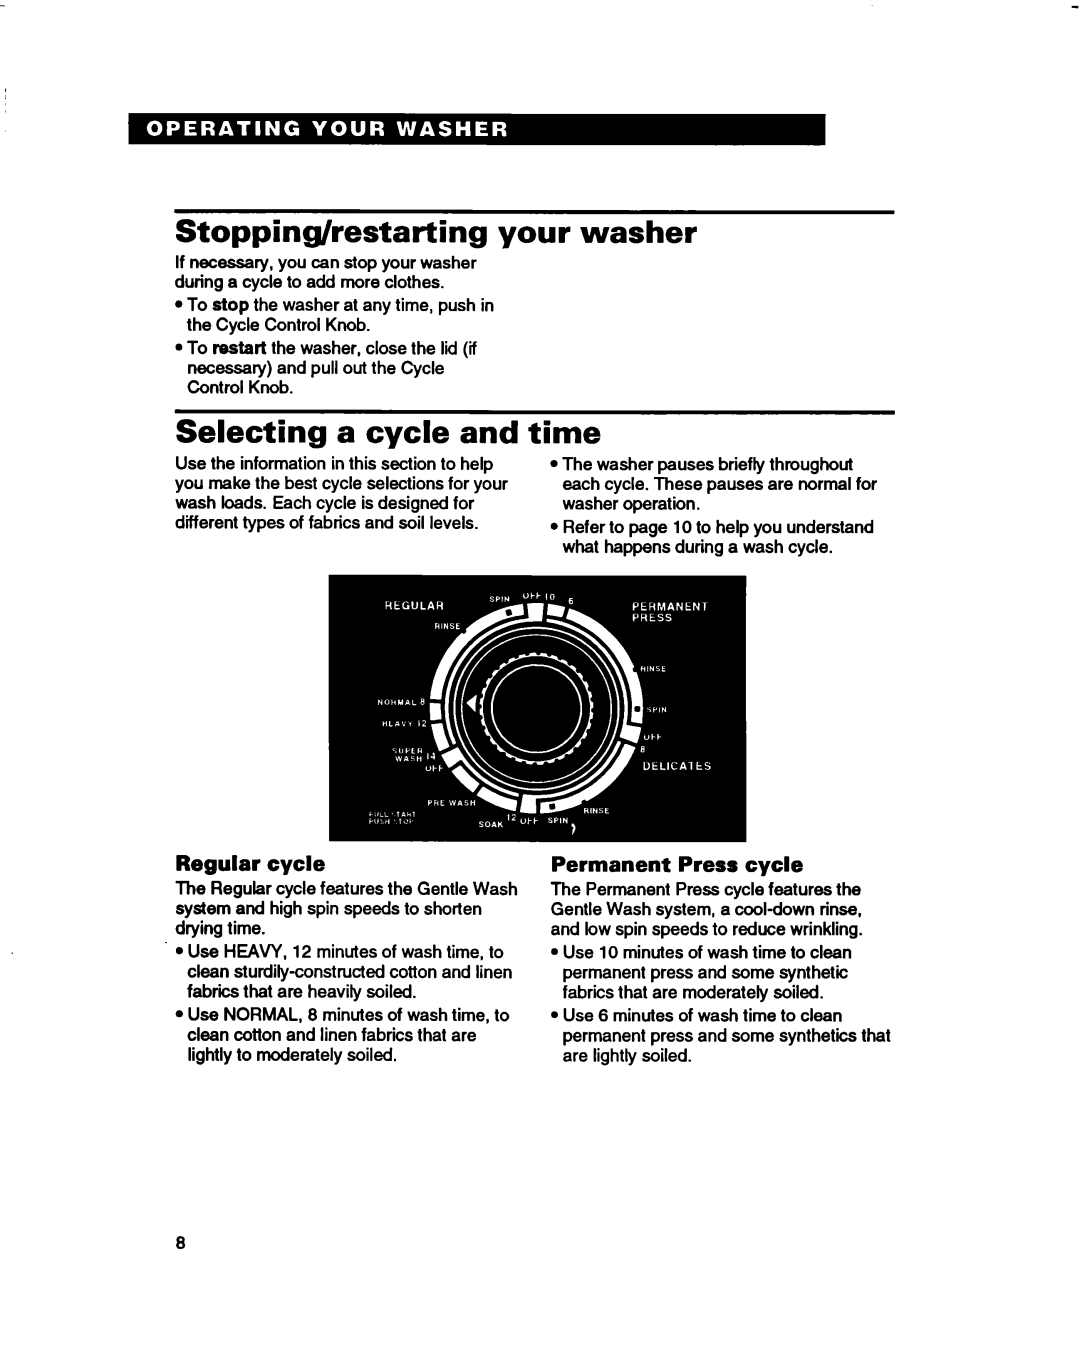 Whirlpool 3396314 Stopping/restarting your washer, Selecting a cycle and time, Regular cycle, Permanent Press cycle 